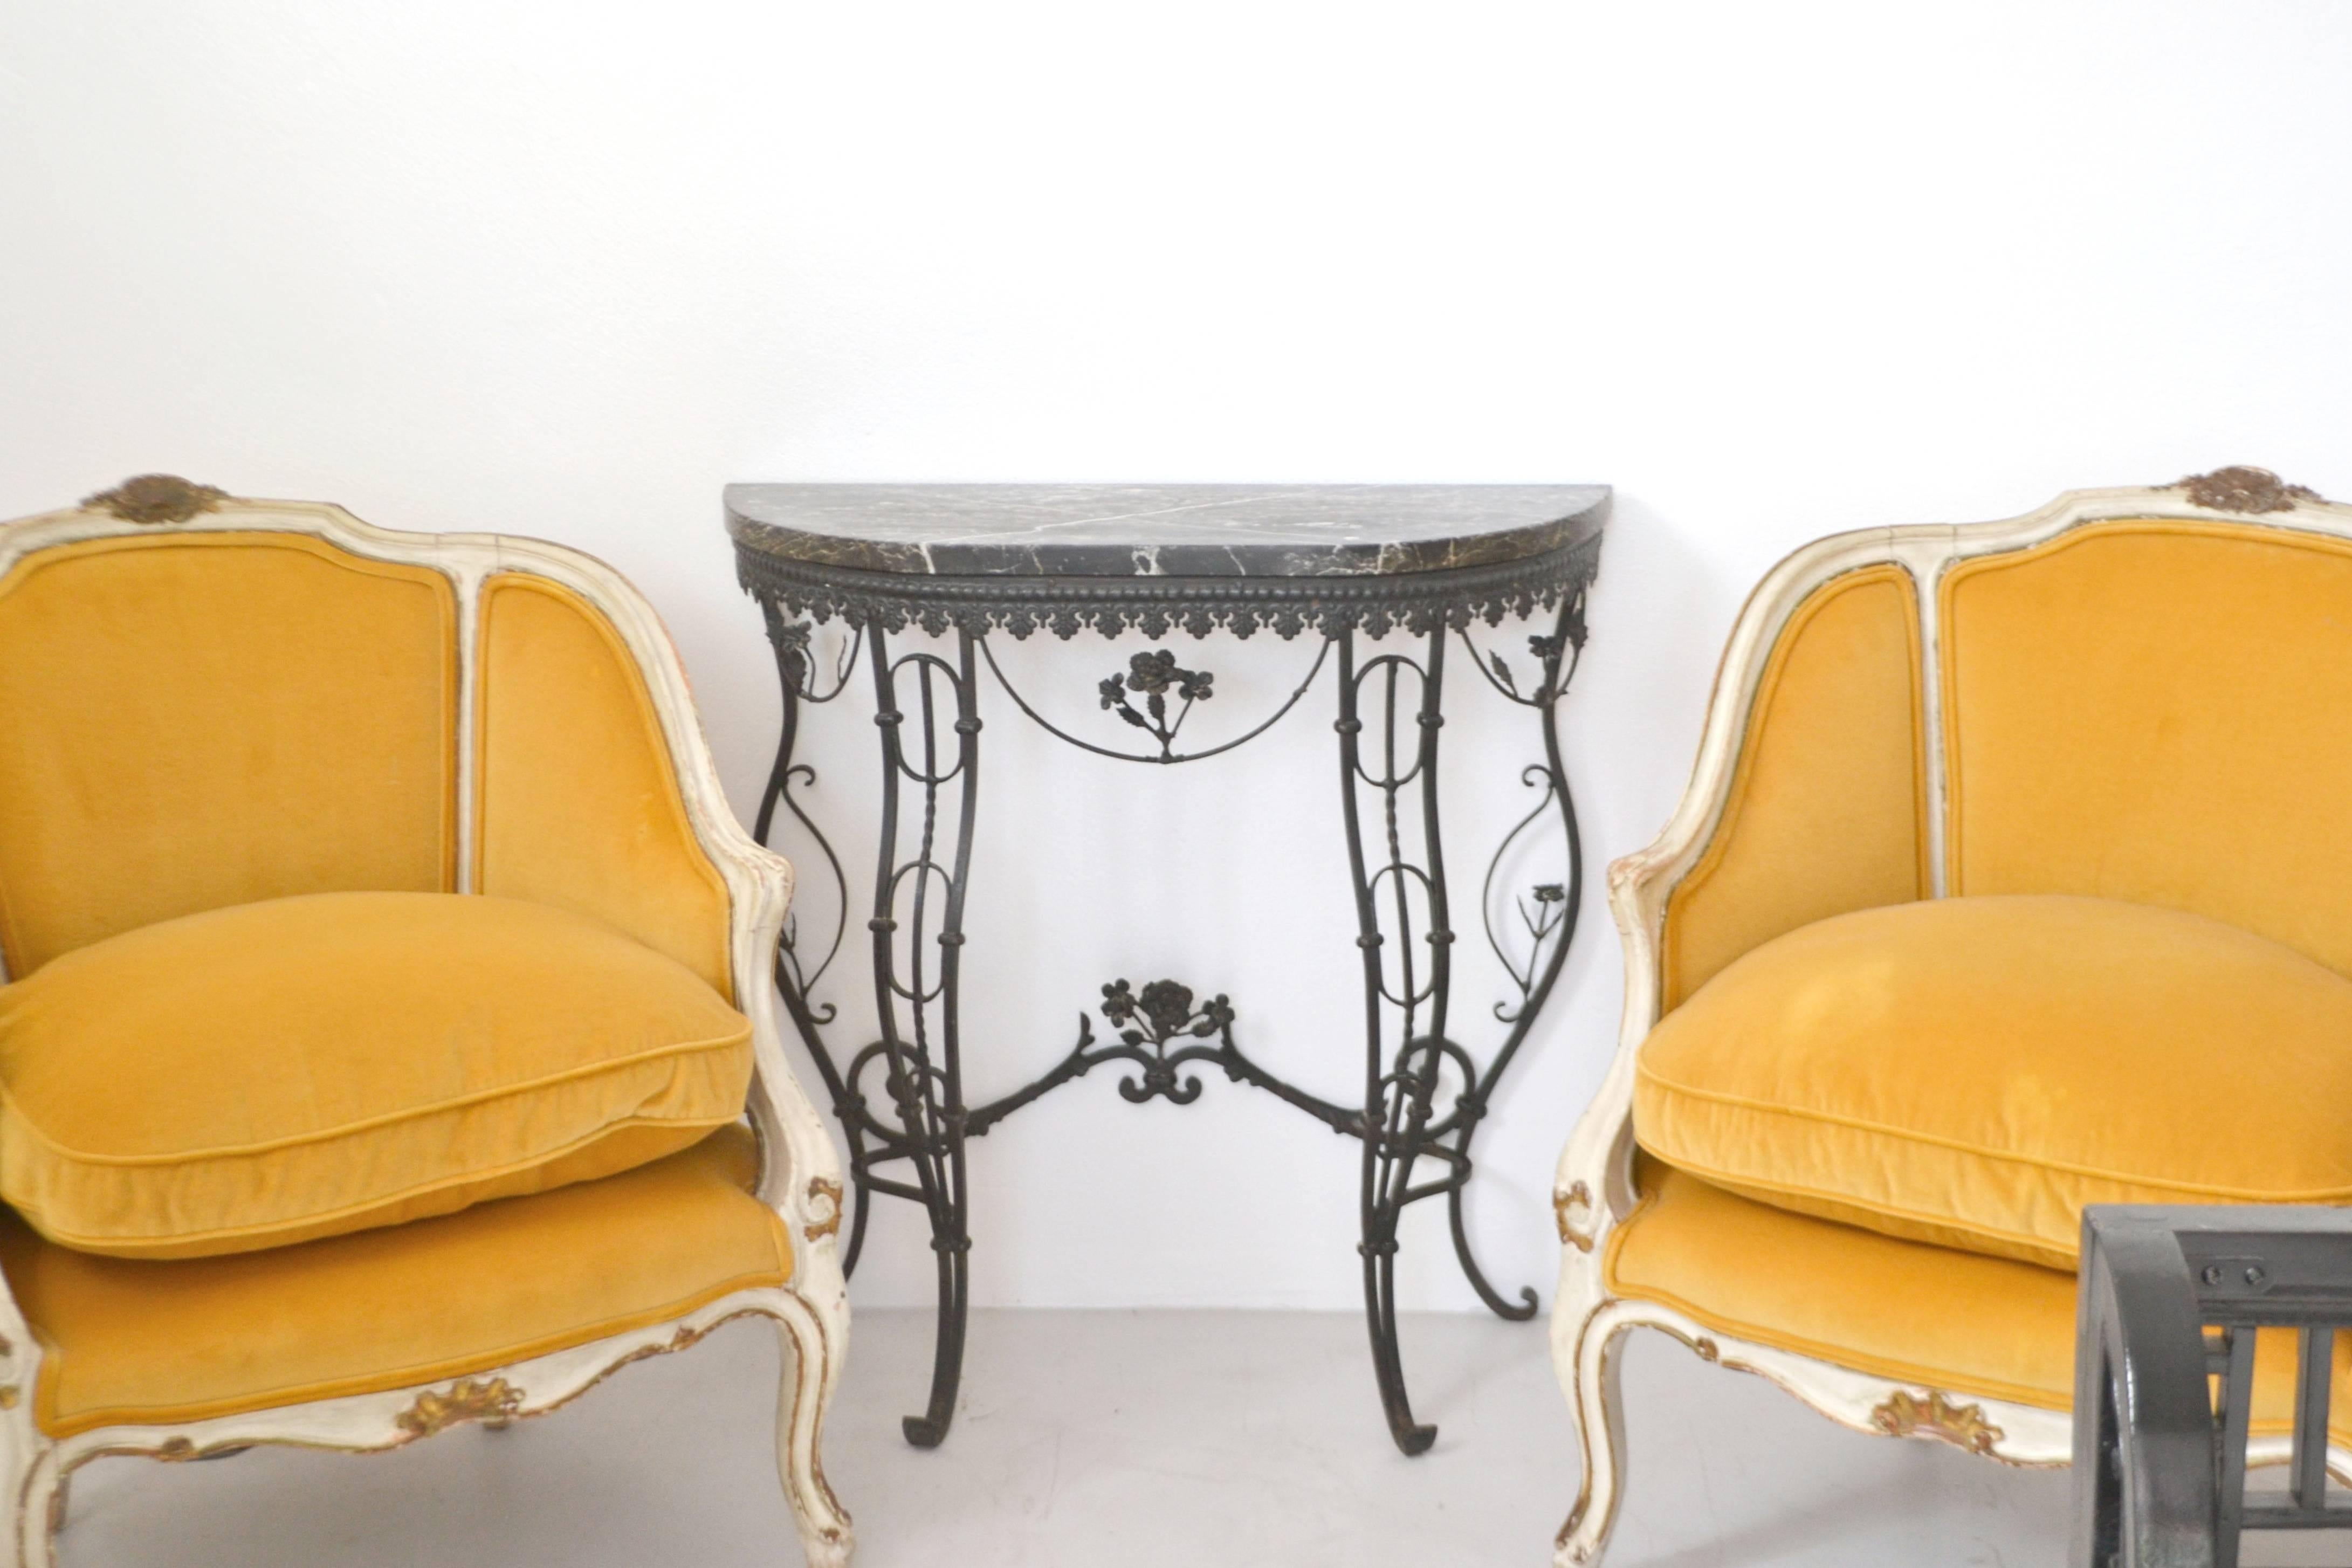 Glamorous pair of French Louis XV style bergere chairs, circa 1920s. These stunning artisan crafted white painted wood framed chairs with giltwood accents and down cushions. The armchairs are upholstered in the original lemon drop yellow cotton